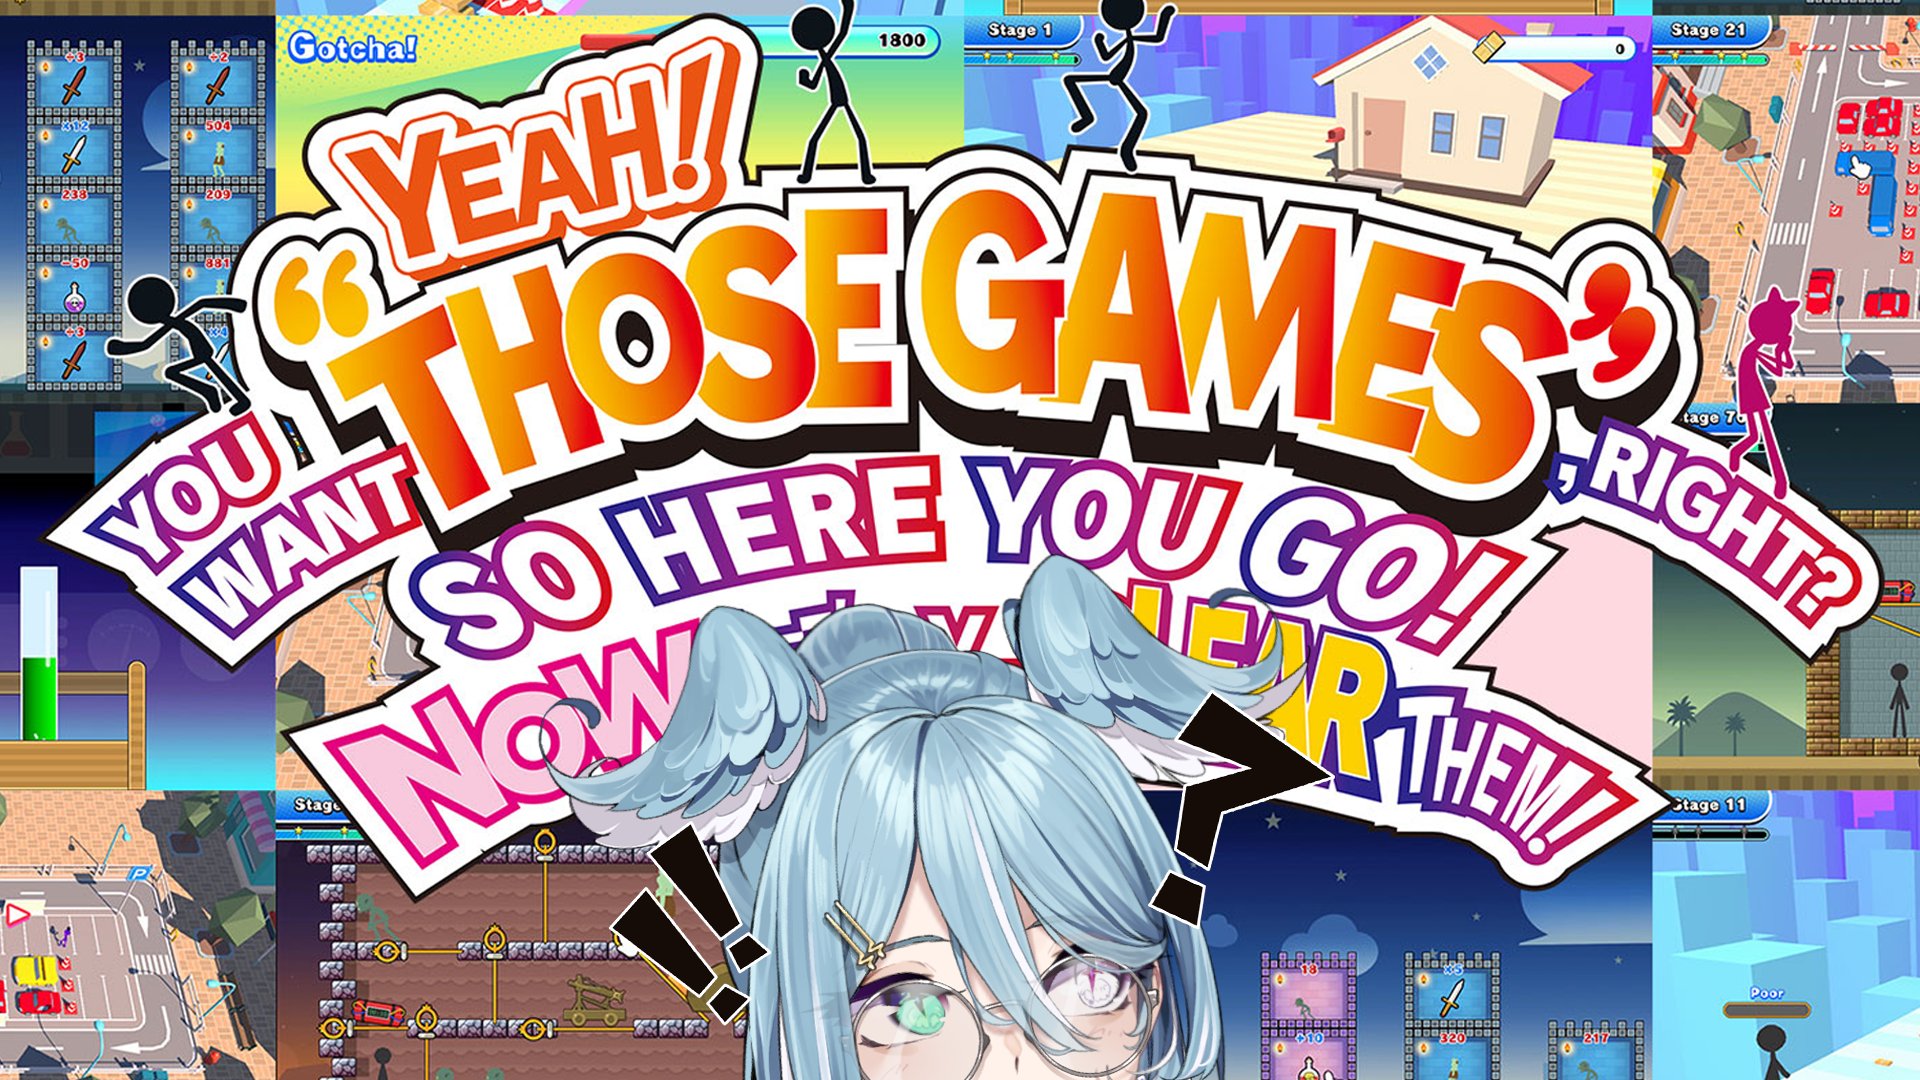 YEAH! YOU WANT THOSE GAMES, RIGHT? SO HERE YOU GO! NOW, LET'S